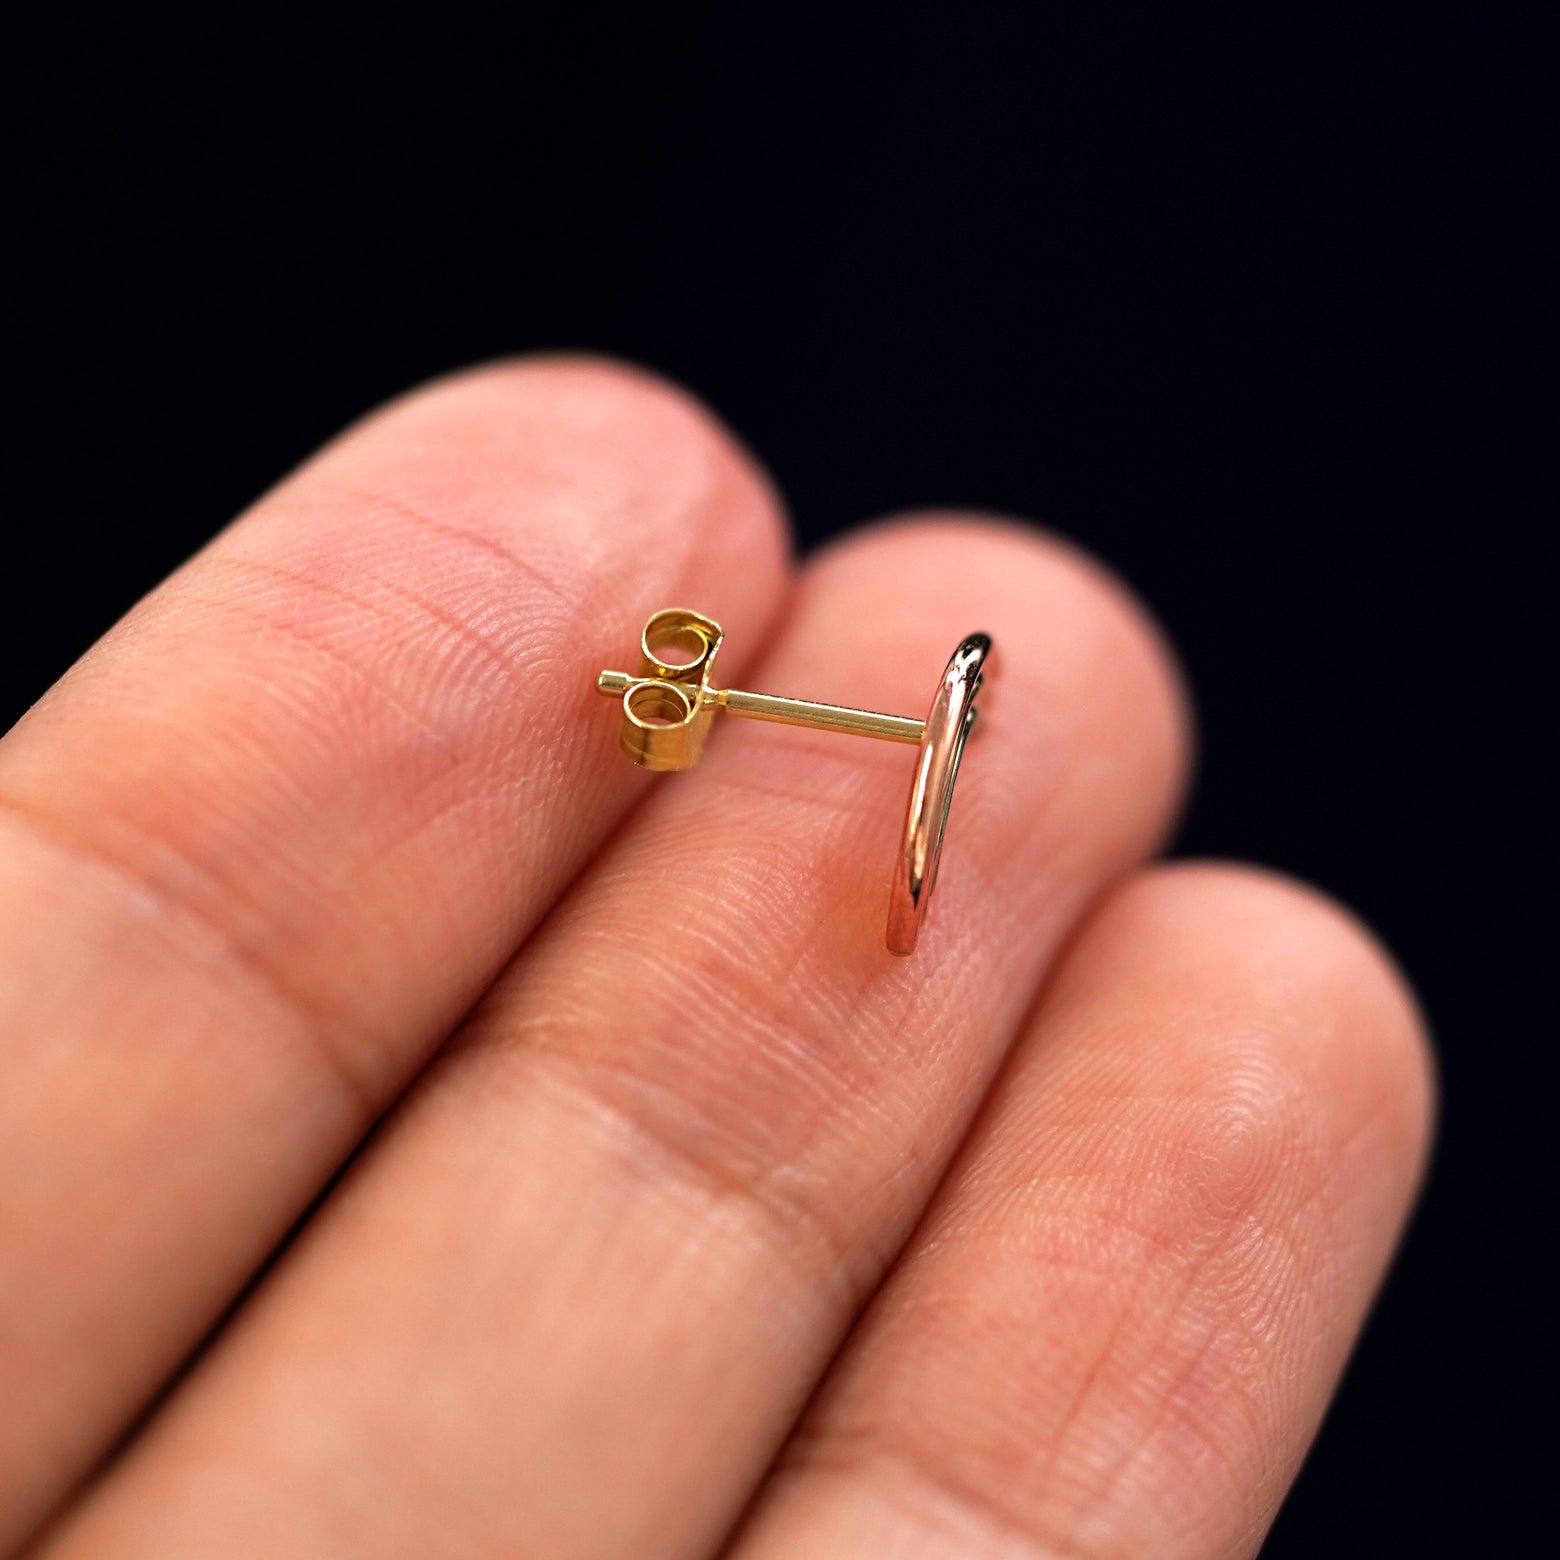 A 14k gold Rainbow Earring sitting sideways on a model's fingertips to show detail